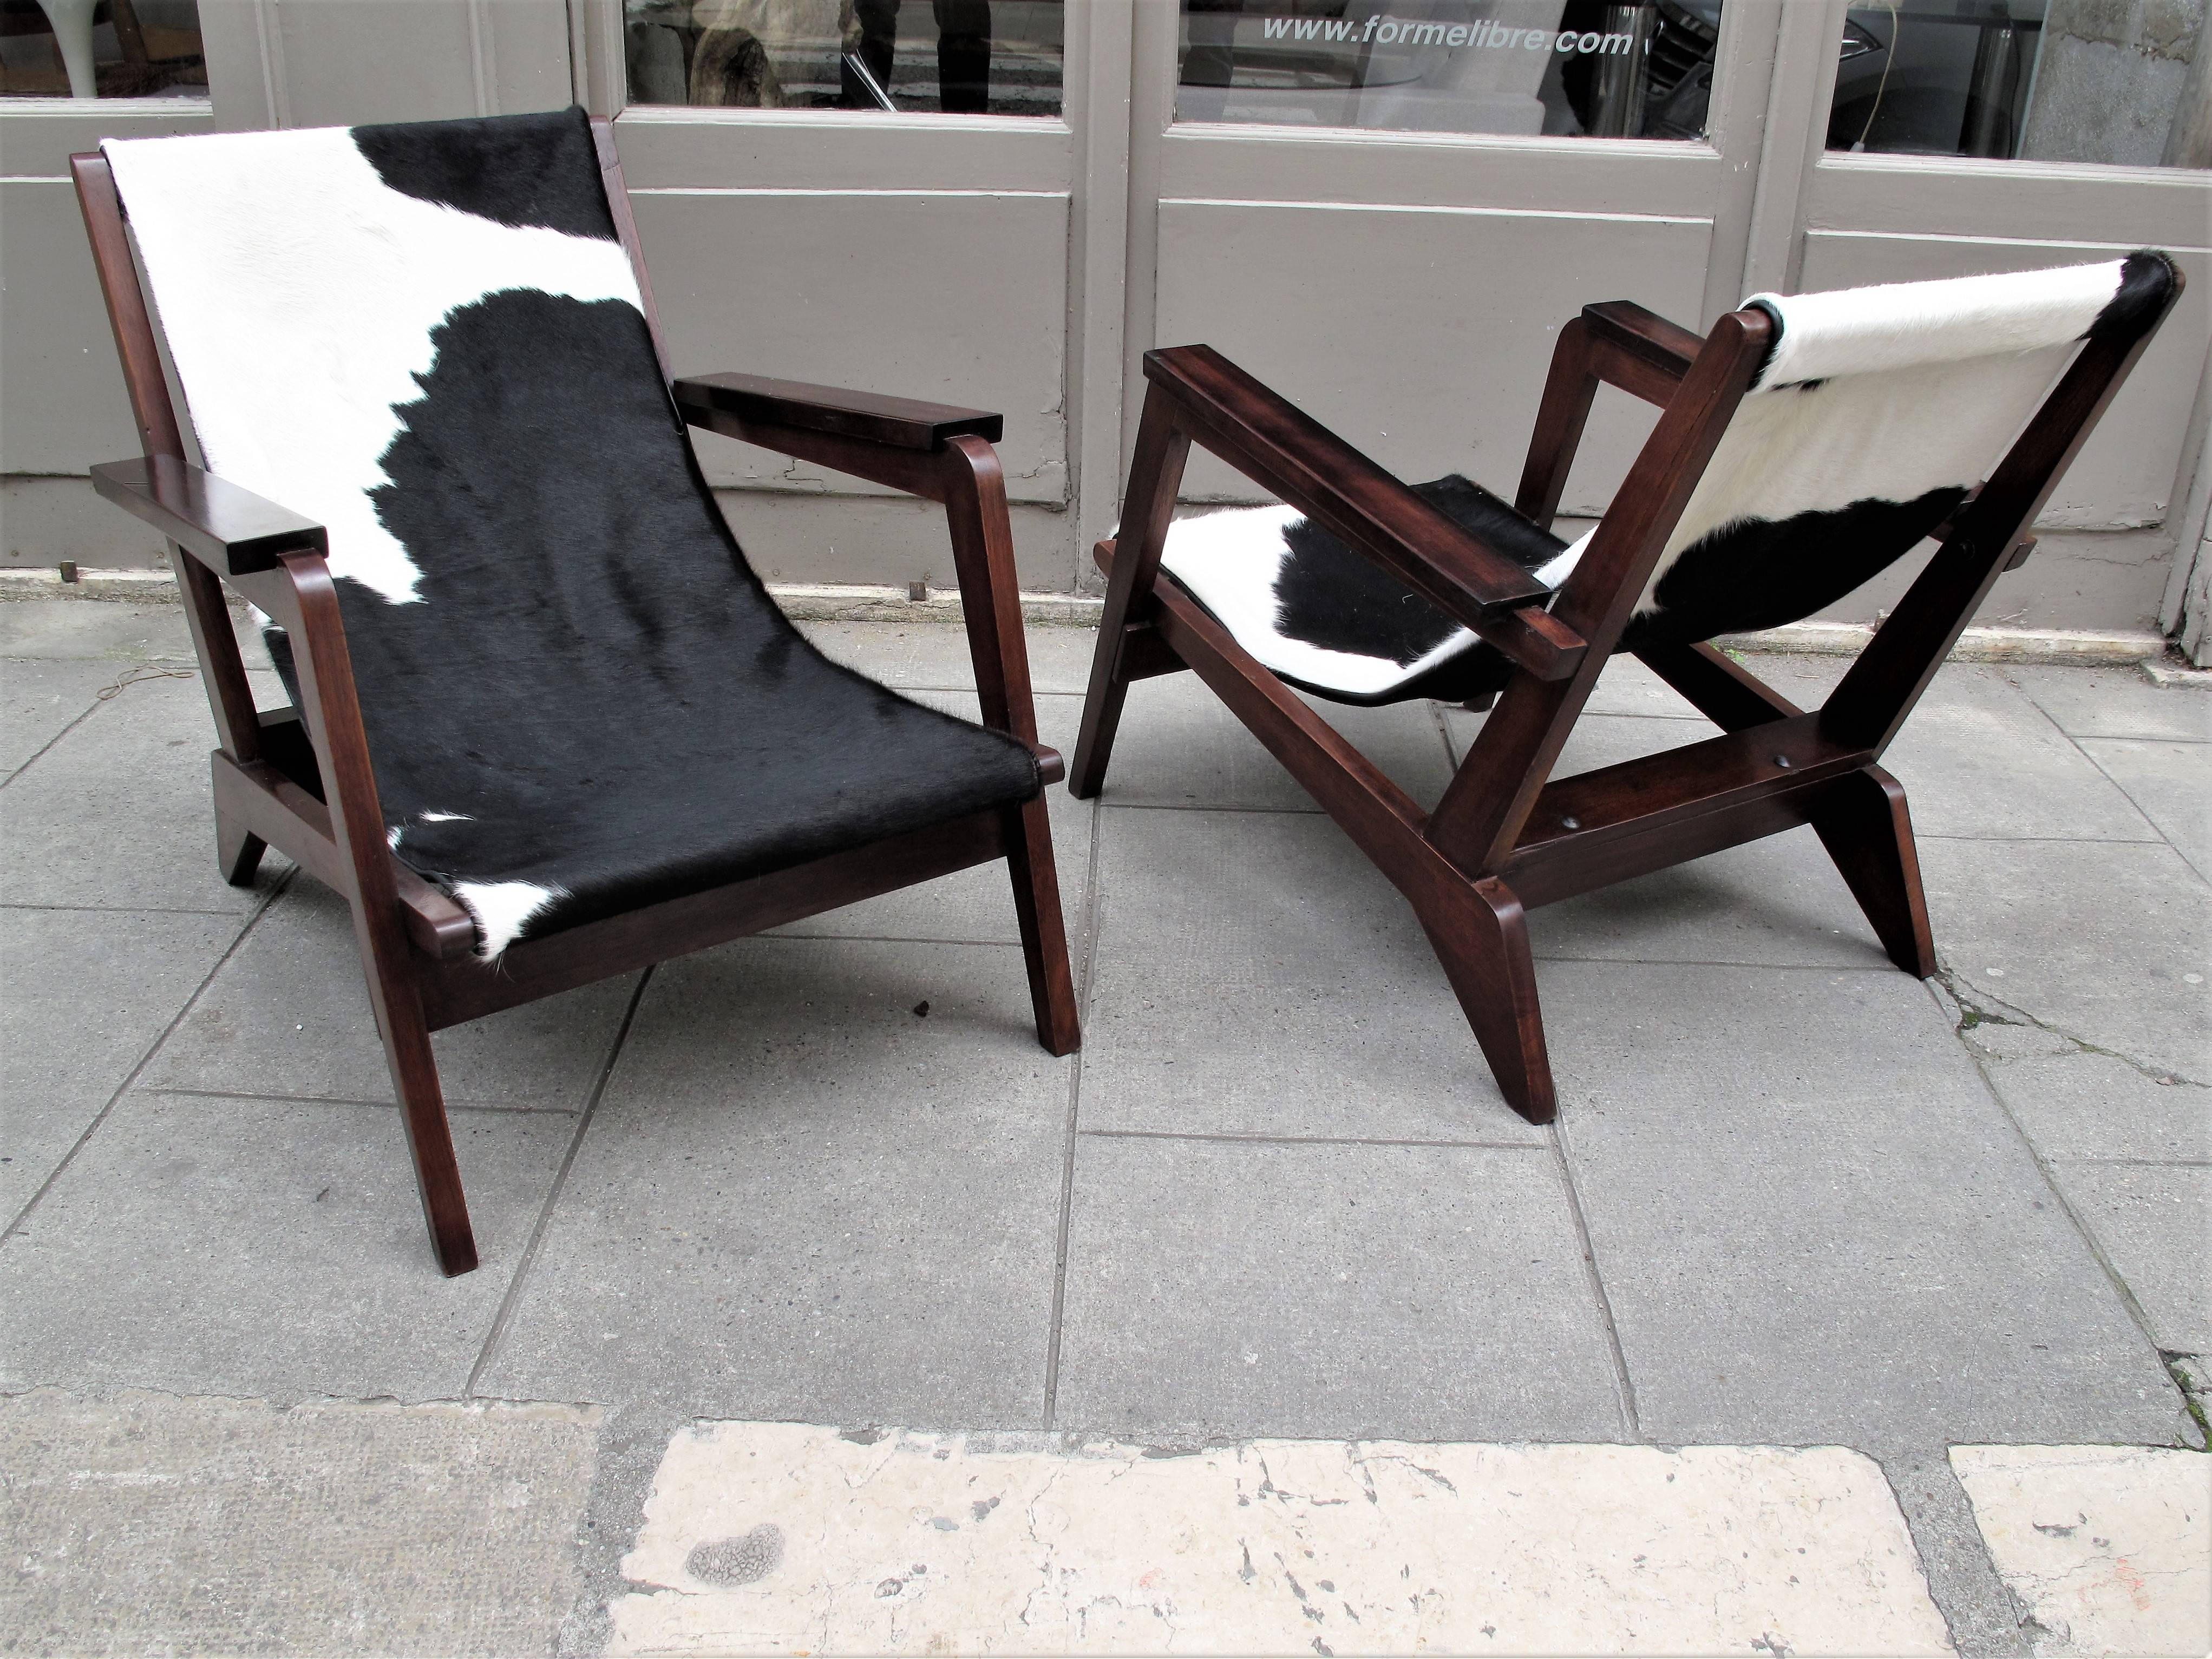 A pair of wooden chairs in mahogany and cowhide.
French work of the 1940s-1950 from Grenoble where Pierre Jeanneret worked after the second war.